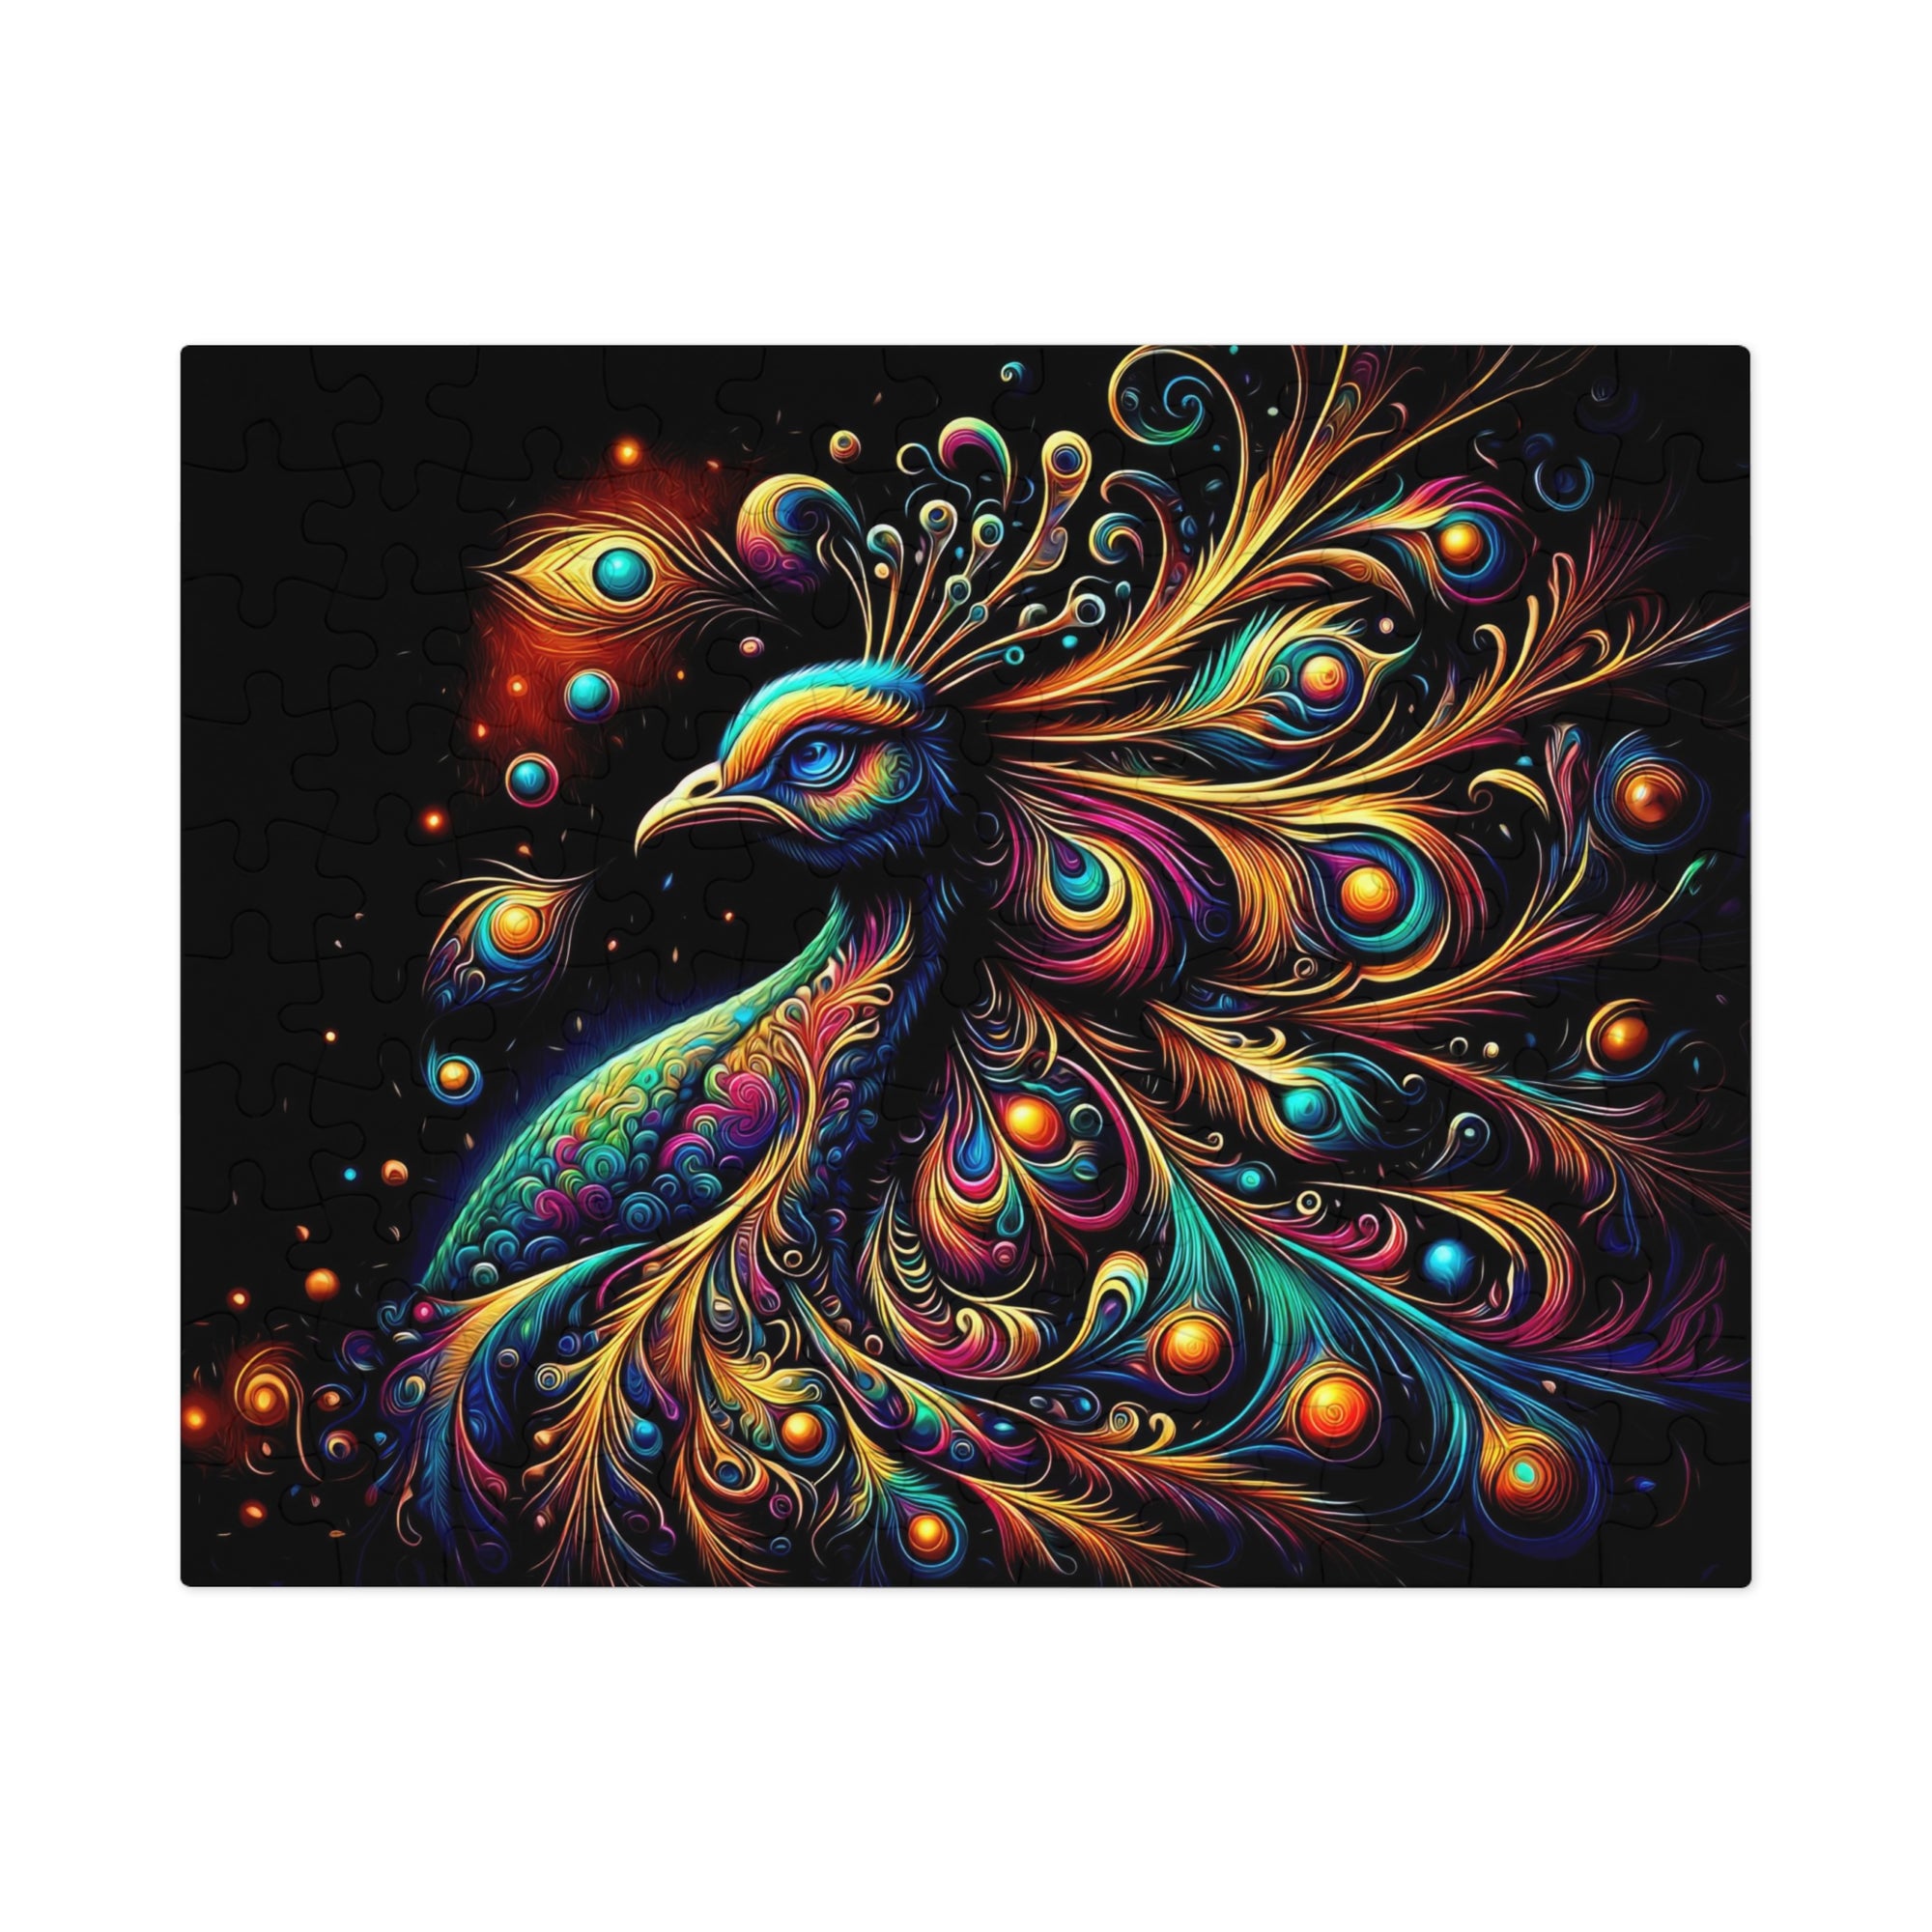 Cosmic Cascade of Plumes Jigsaw Puzzle